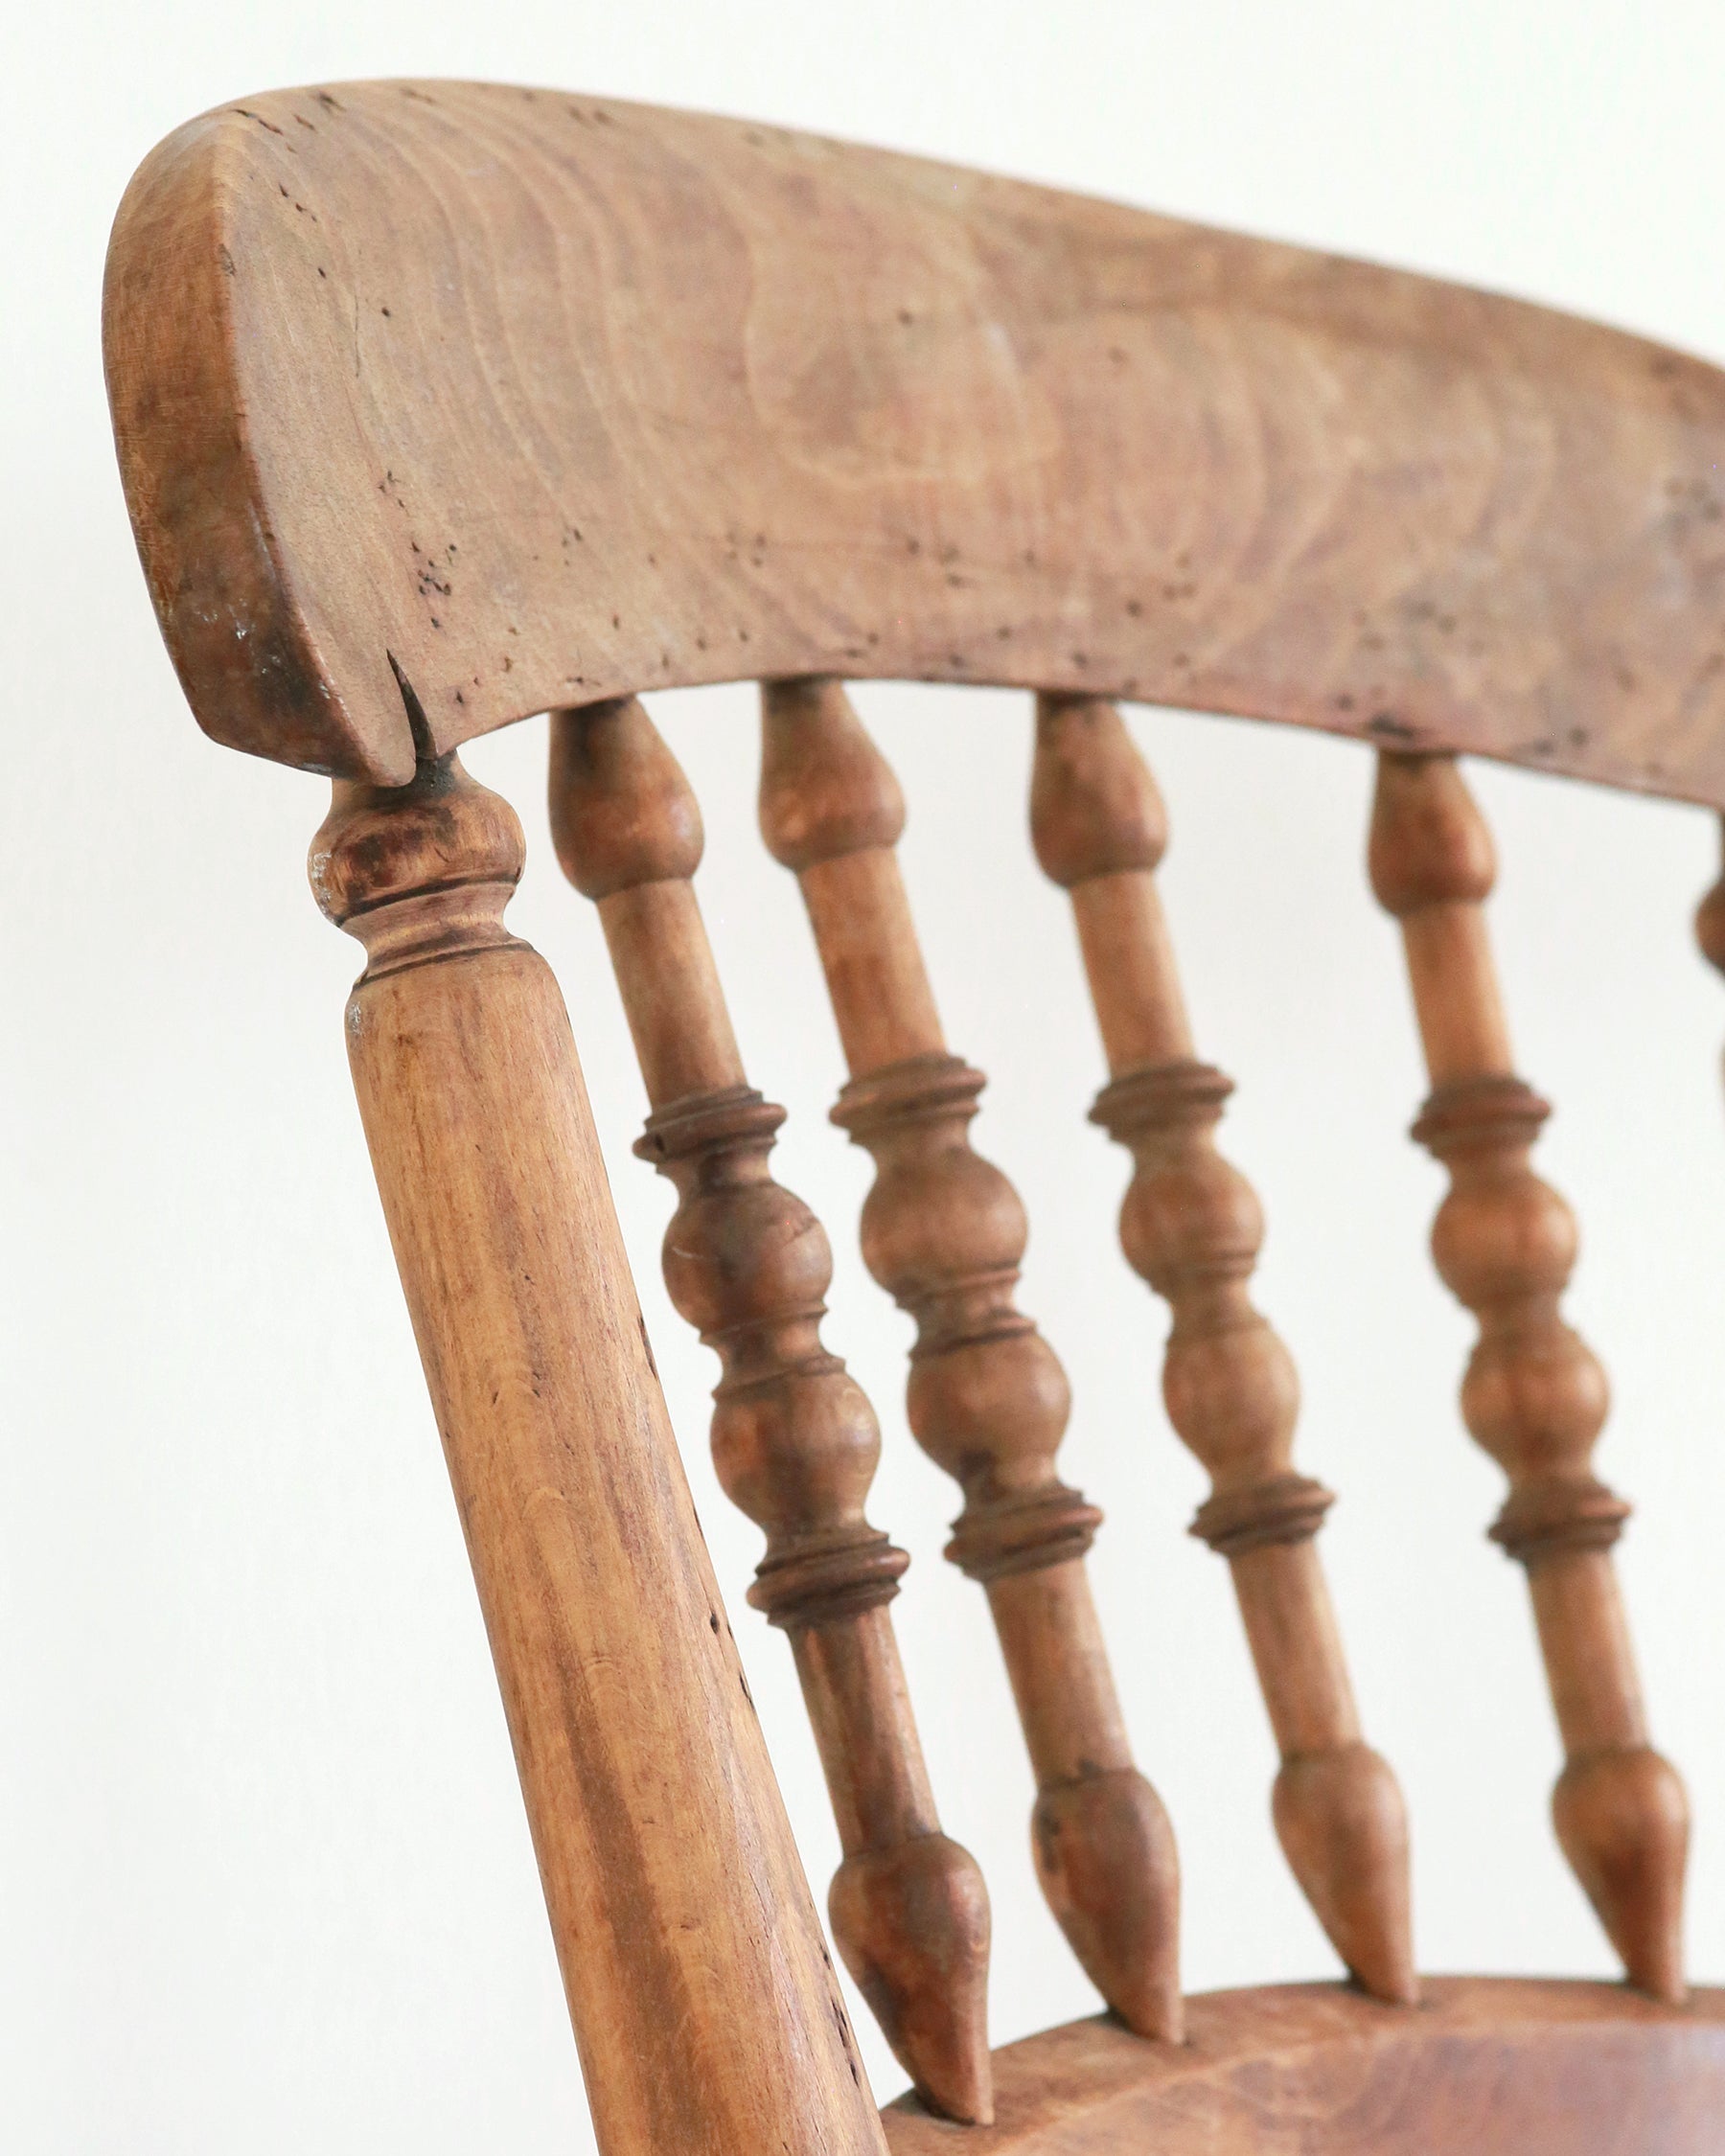 Rocking chair carved wood spindles